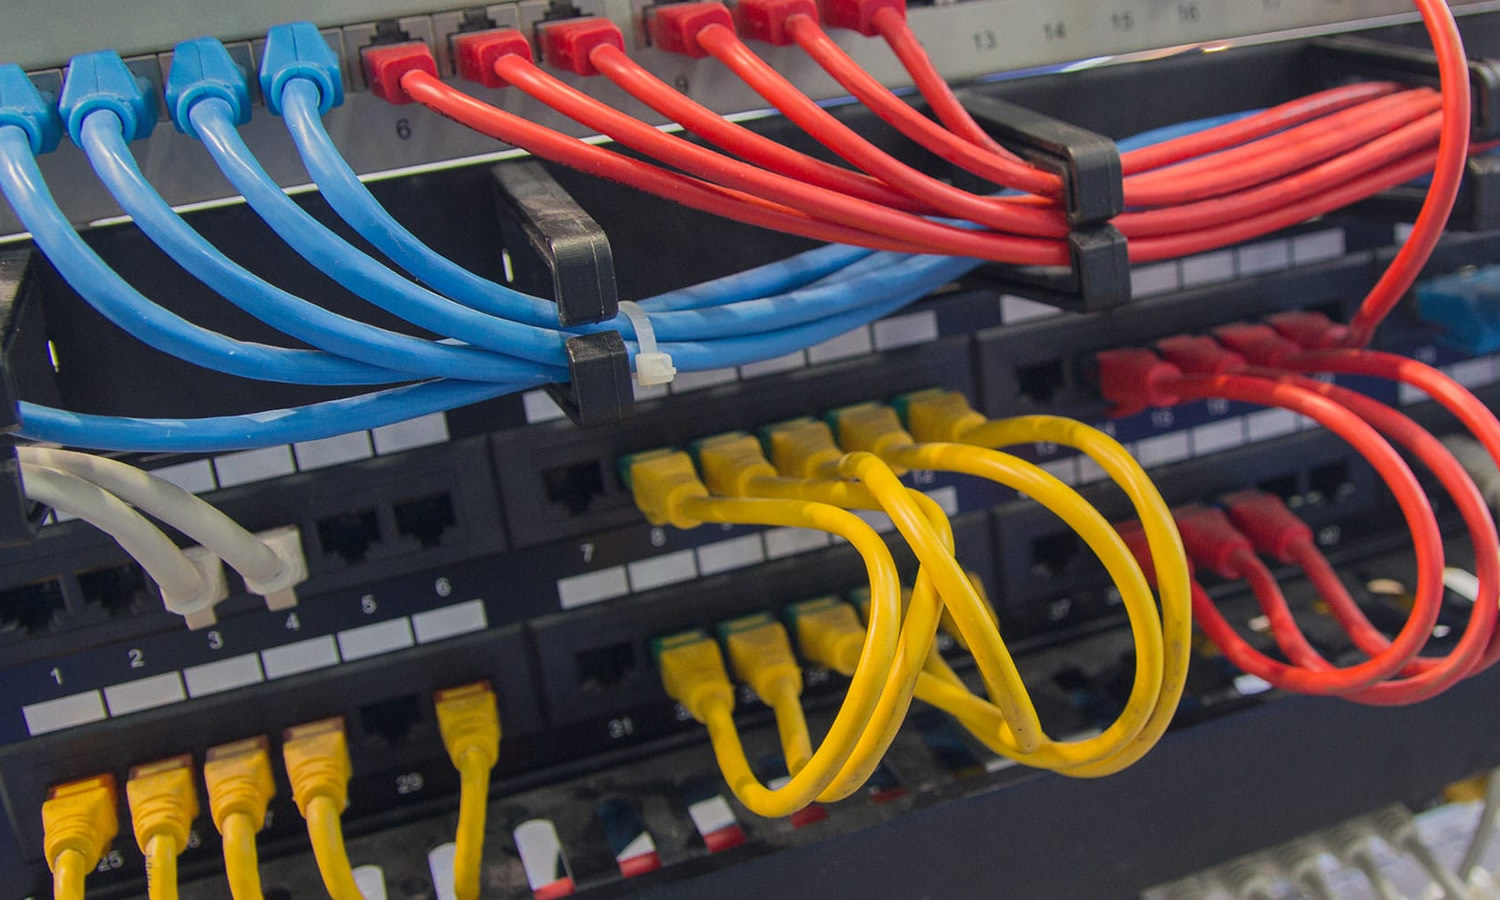 STRUCTURED CABLING
